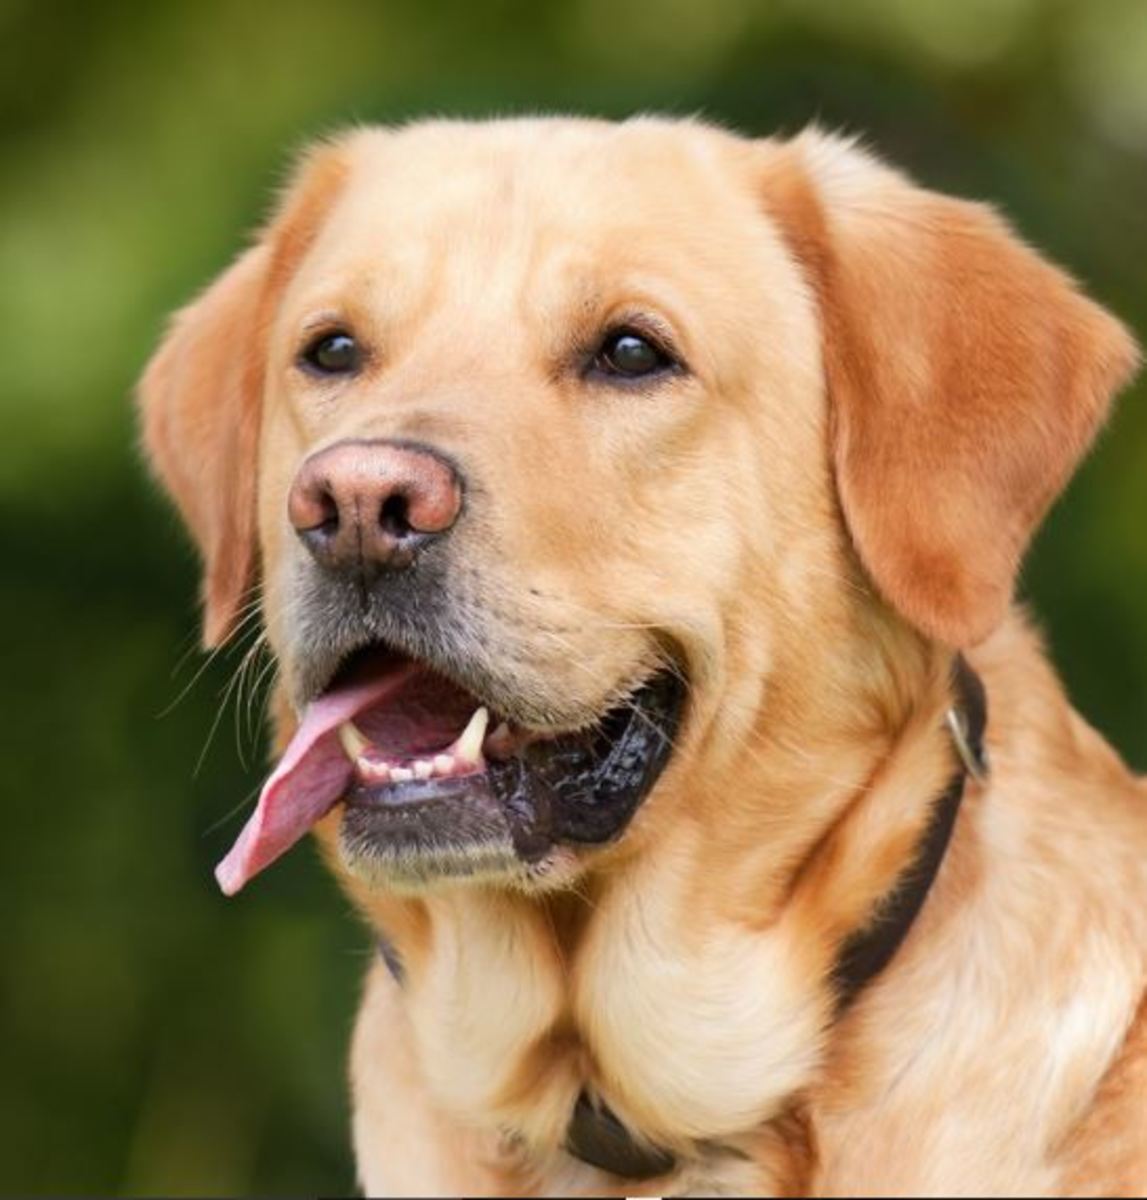  Spleen enlargement in dogs is common in middle-aged and older dogs.